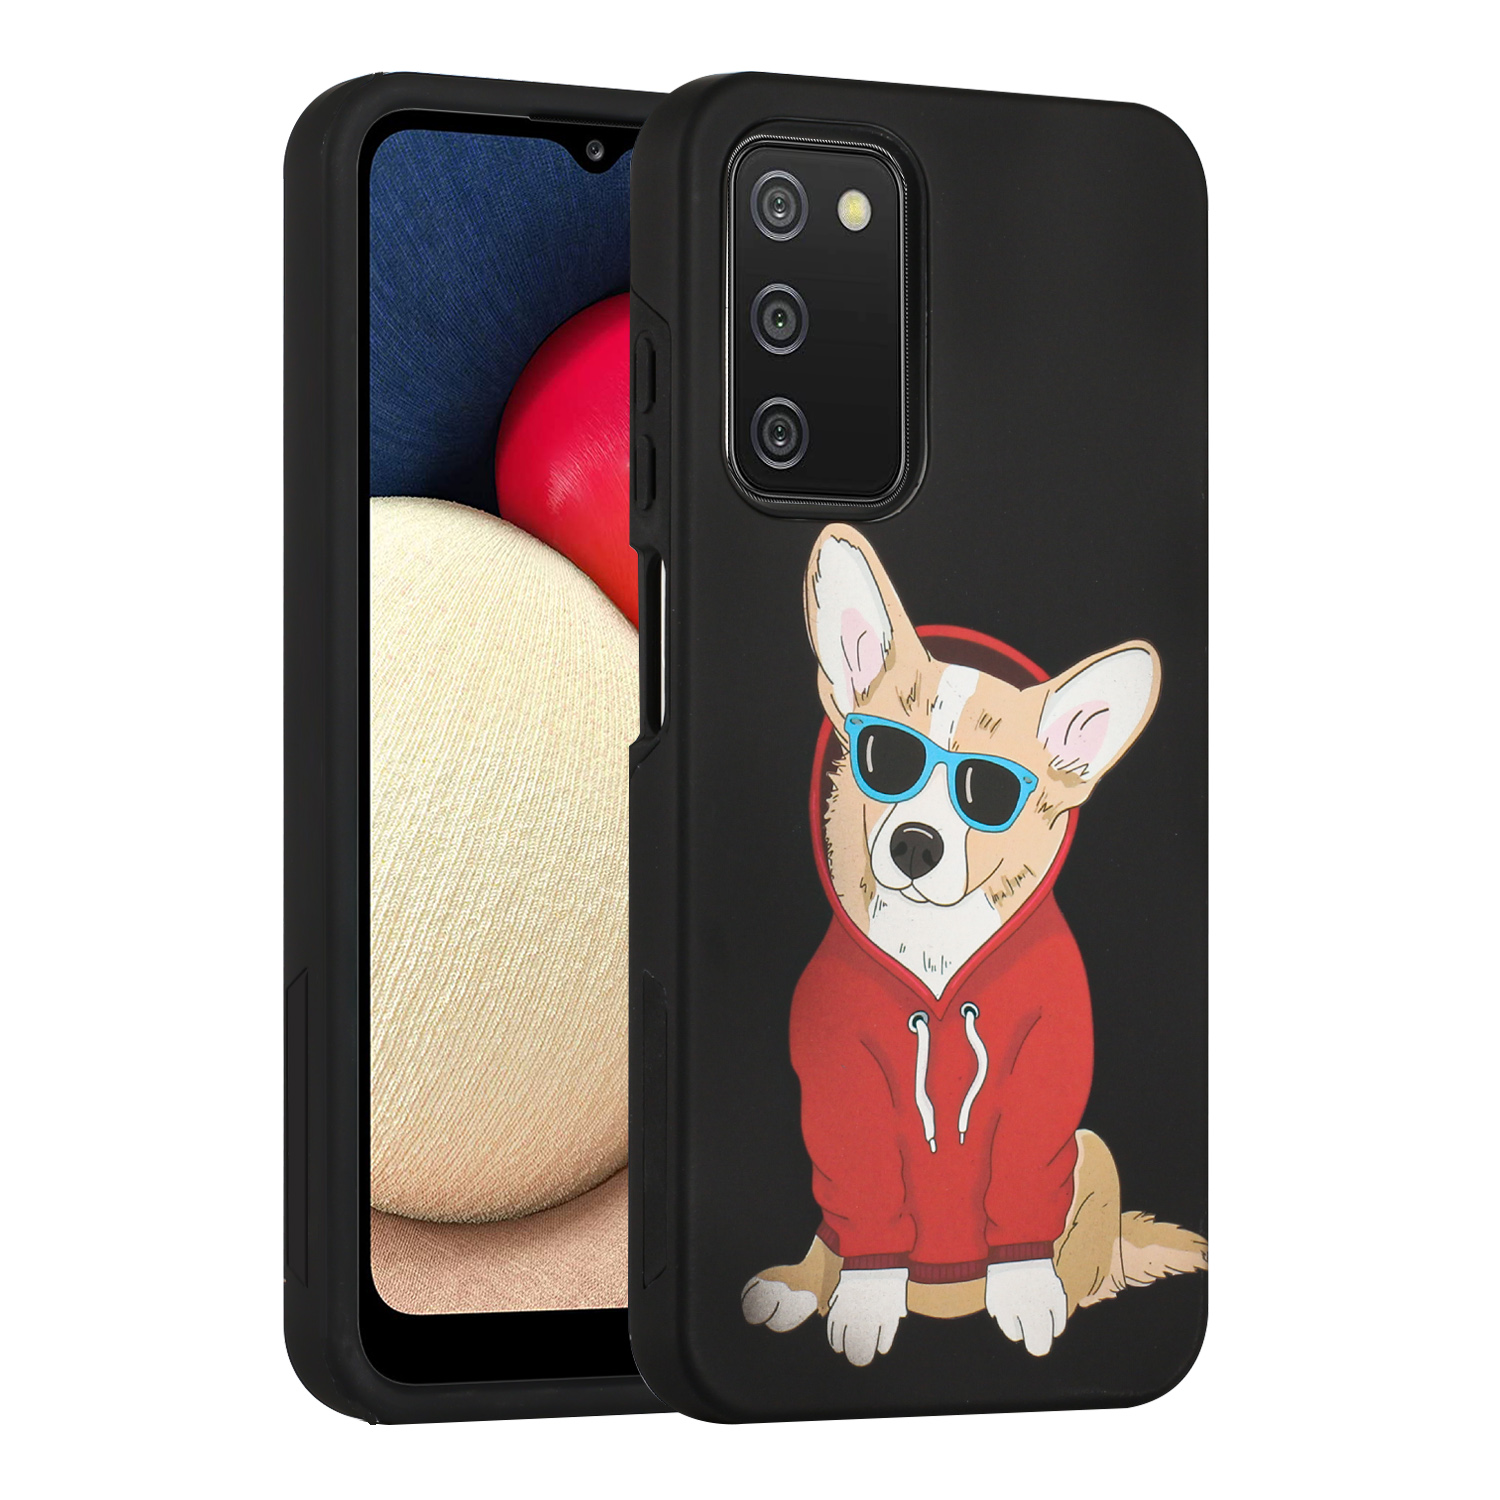 Glossy Design Dual Layer Armor Case Cover for Galaxy A03s (DOG)